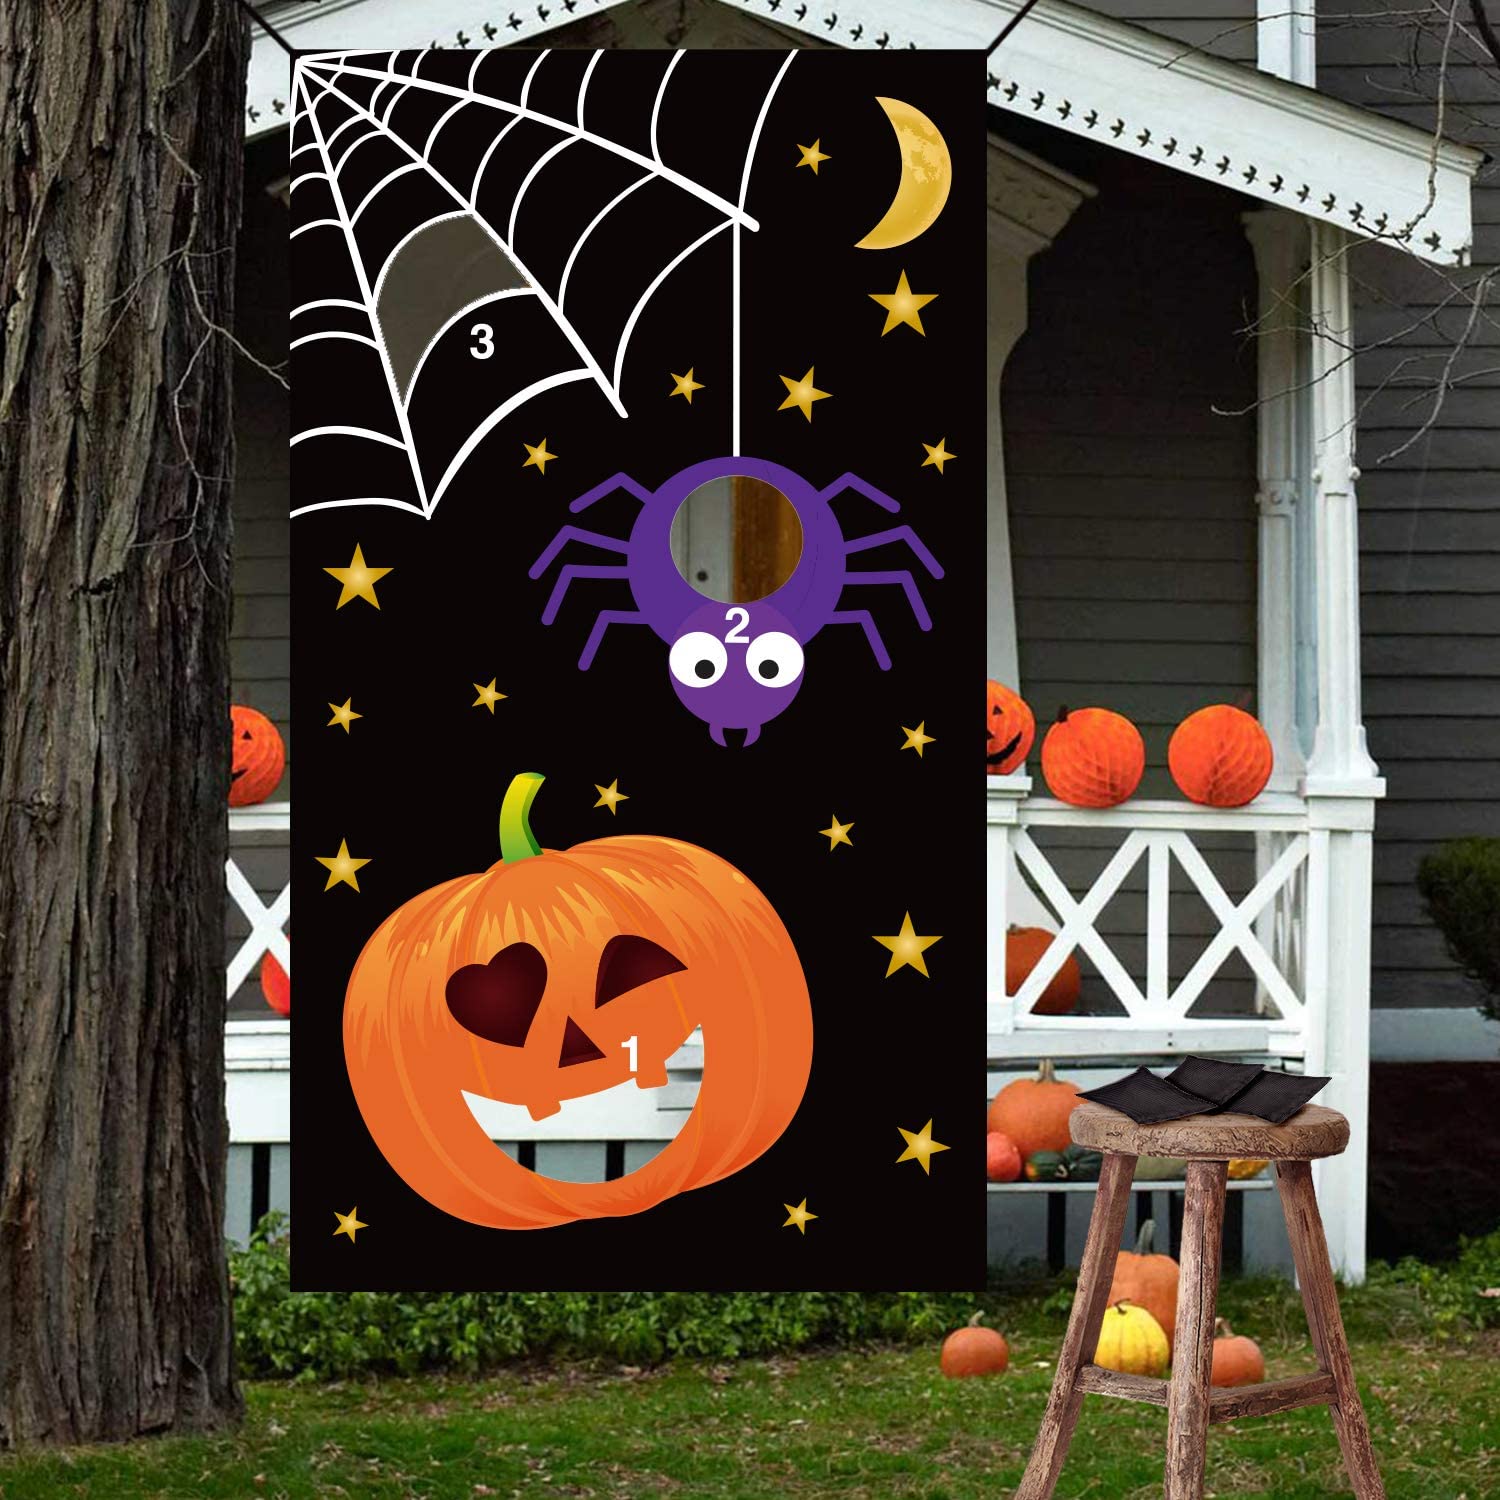 Halloween Toys Halloween Party Favor Halloween Inflatable Spider and Witch Hat Ring Toss Game for Kids Halloween Games Pumpkin Ghost Toss Game with Bean Bags ThinkMax Halloween Toss Games 